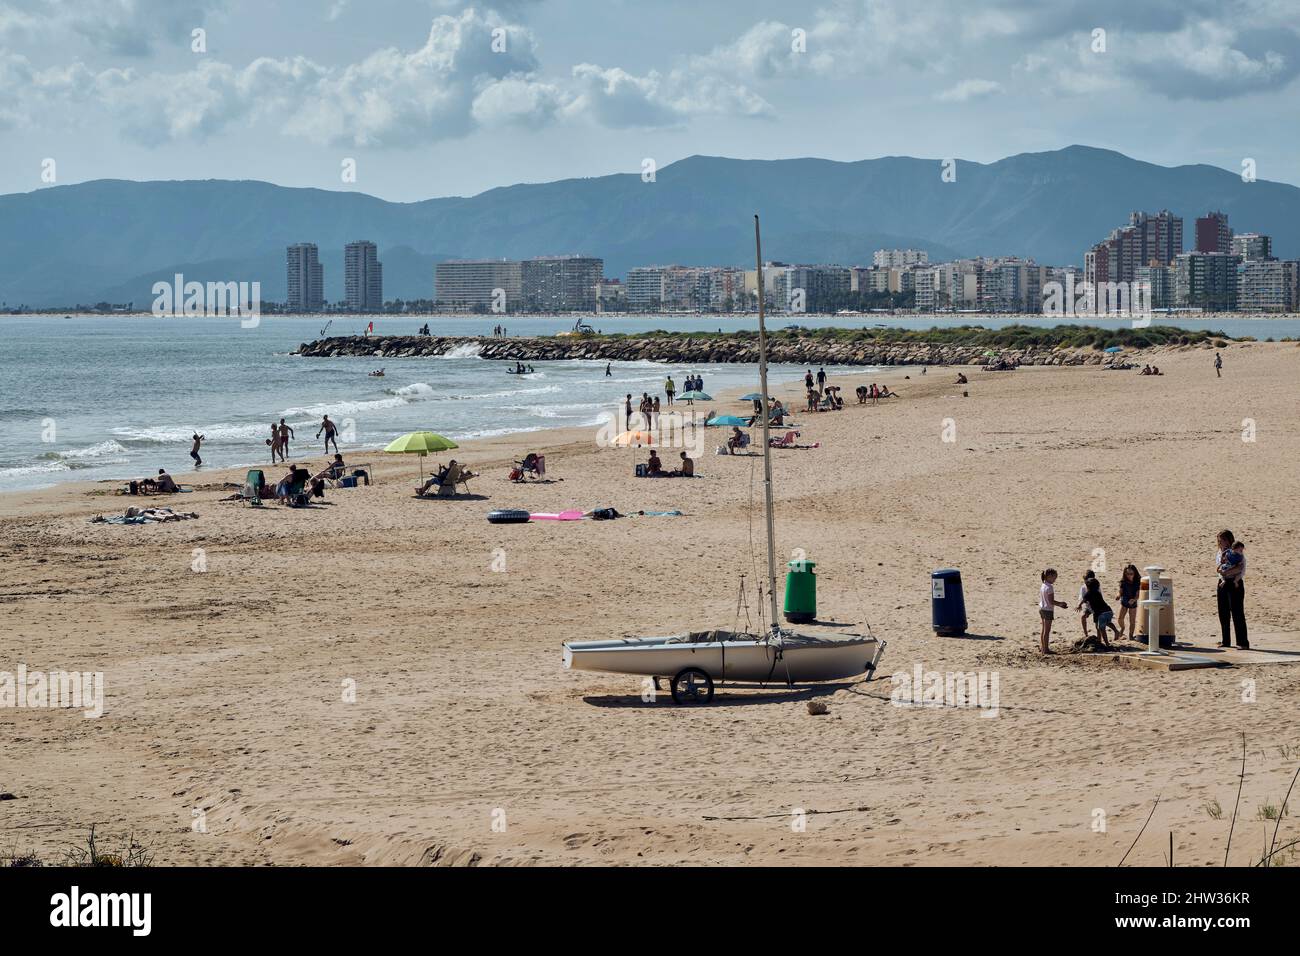 people sunbathing their umbrellas on the sand and bathing in the Cap Blanc beach of the coastal town of Cullera province of Valencia, Spain Stock Photo - Alamy